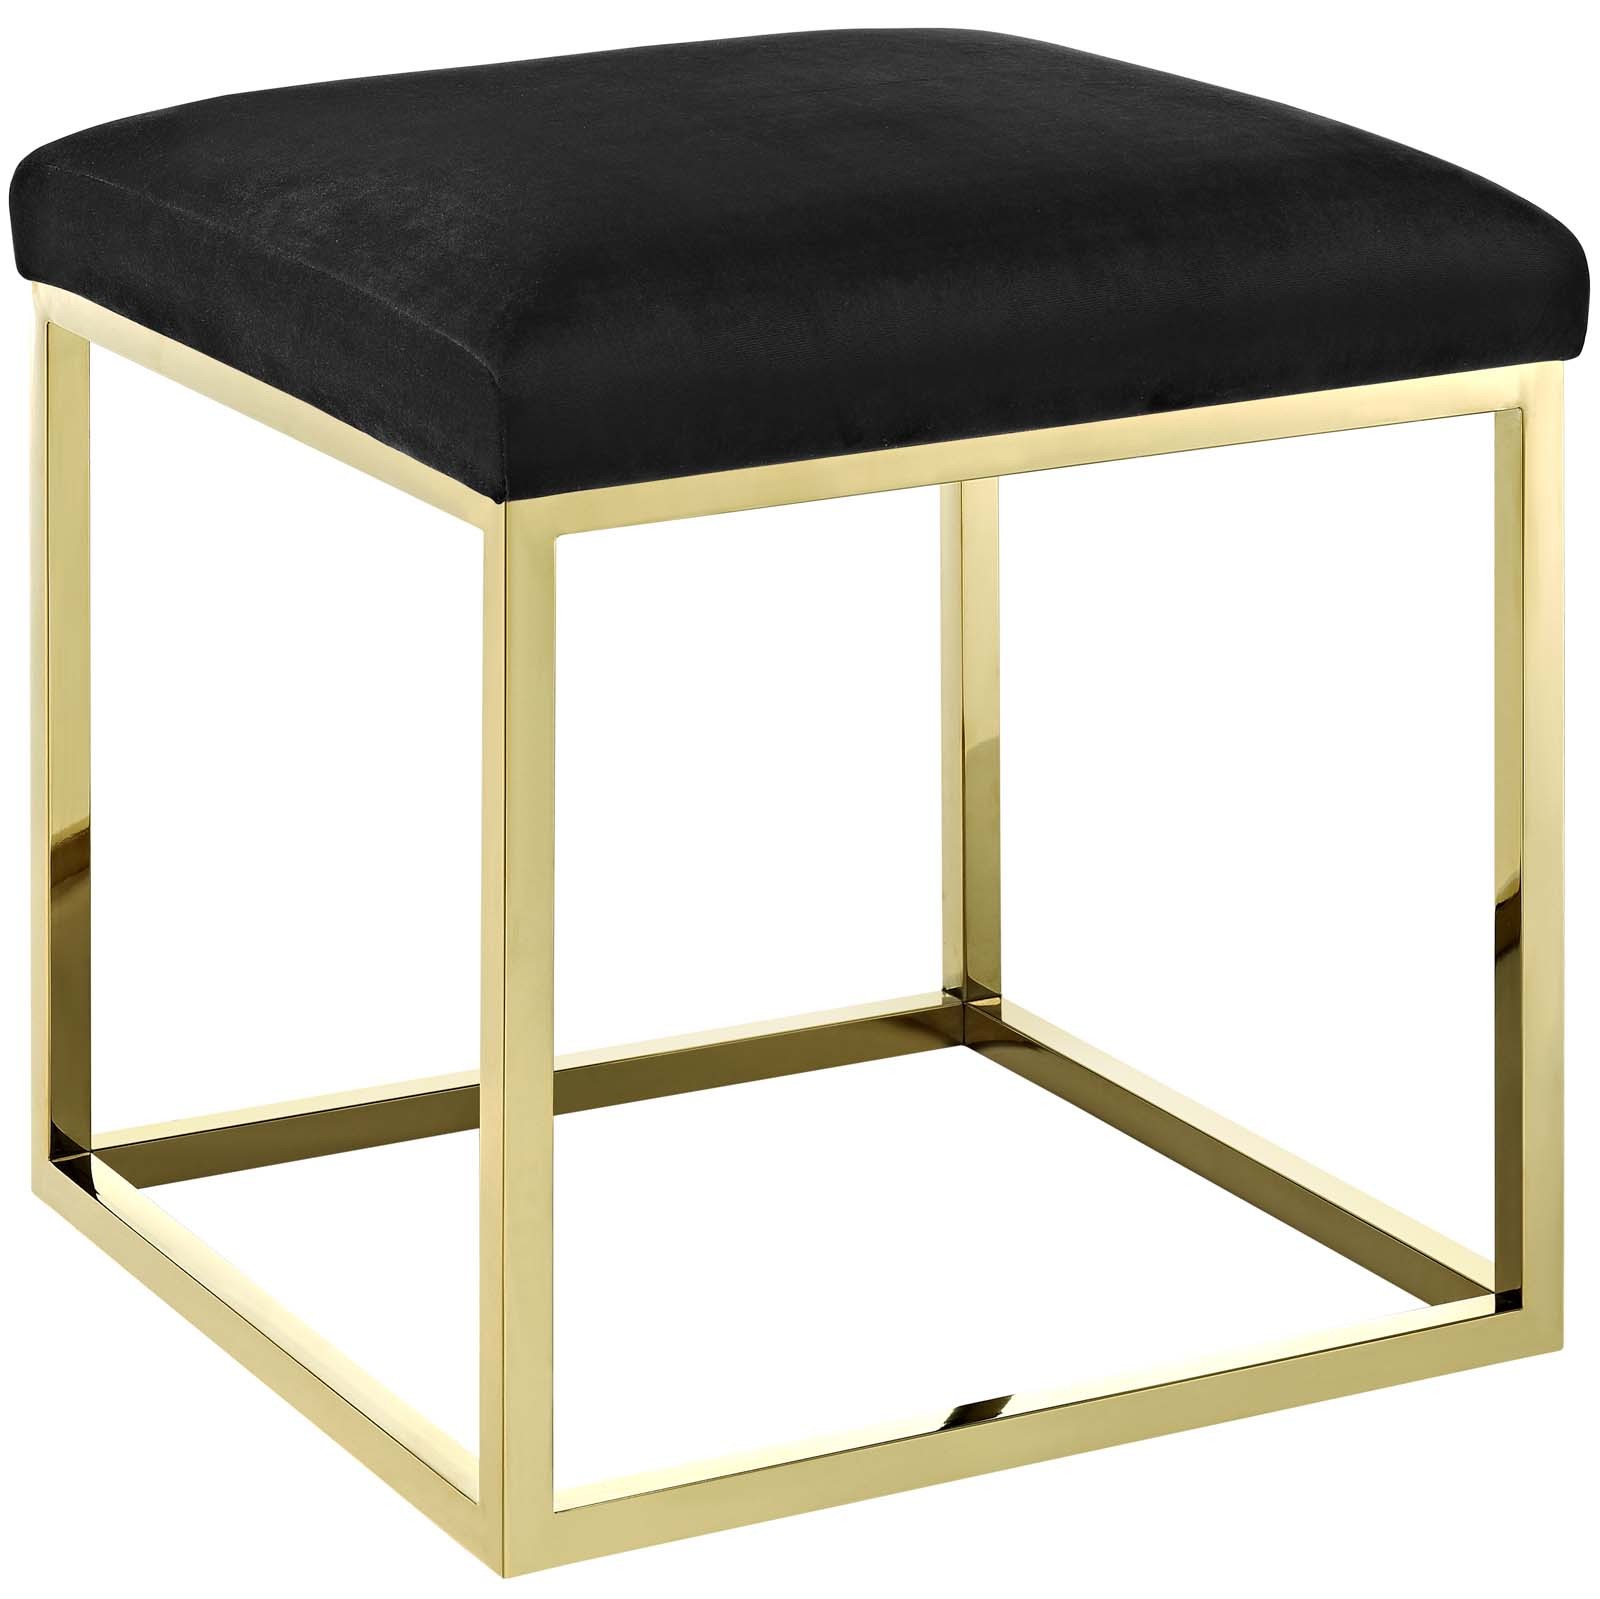 Anticipate Ottoman with Gold Stainless Steel Base